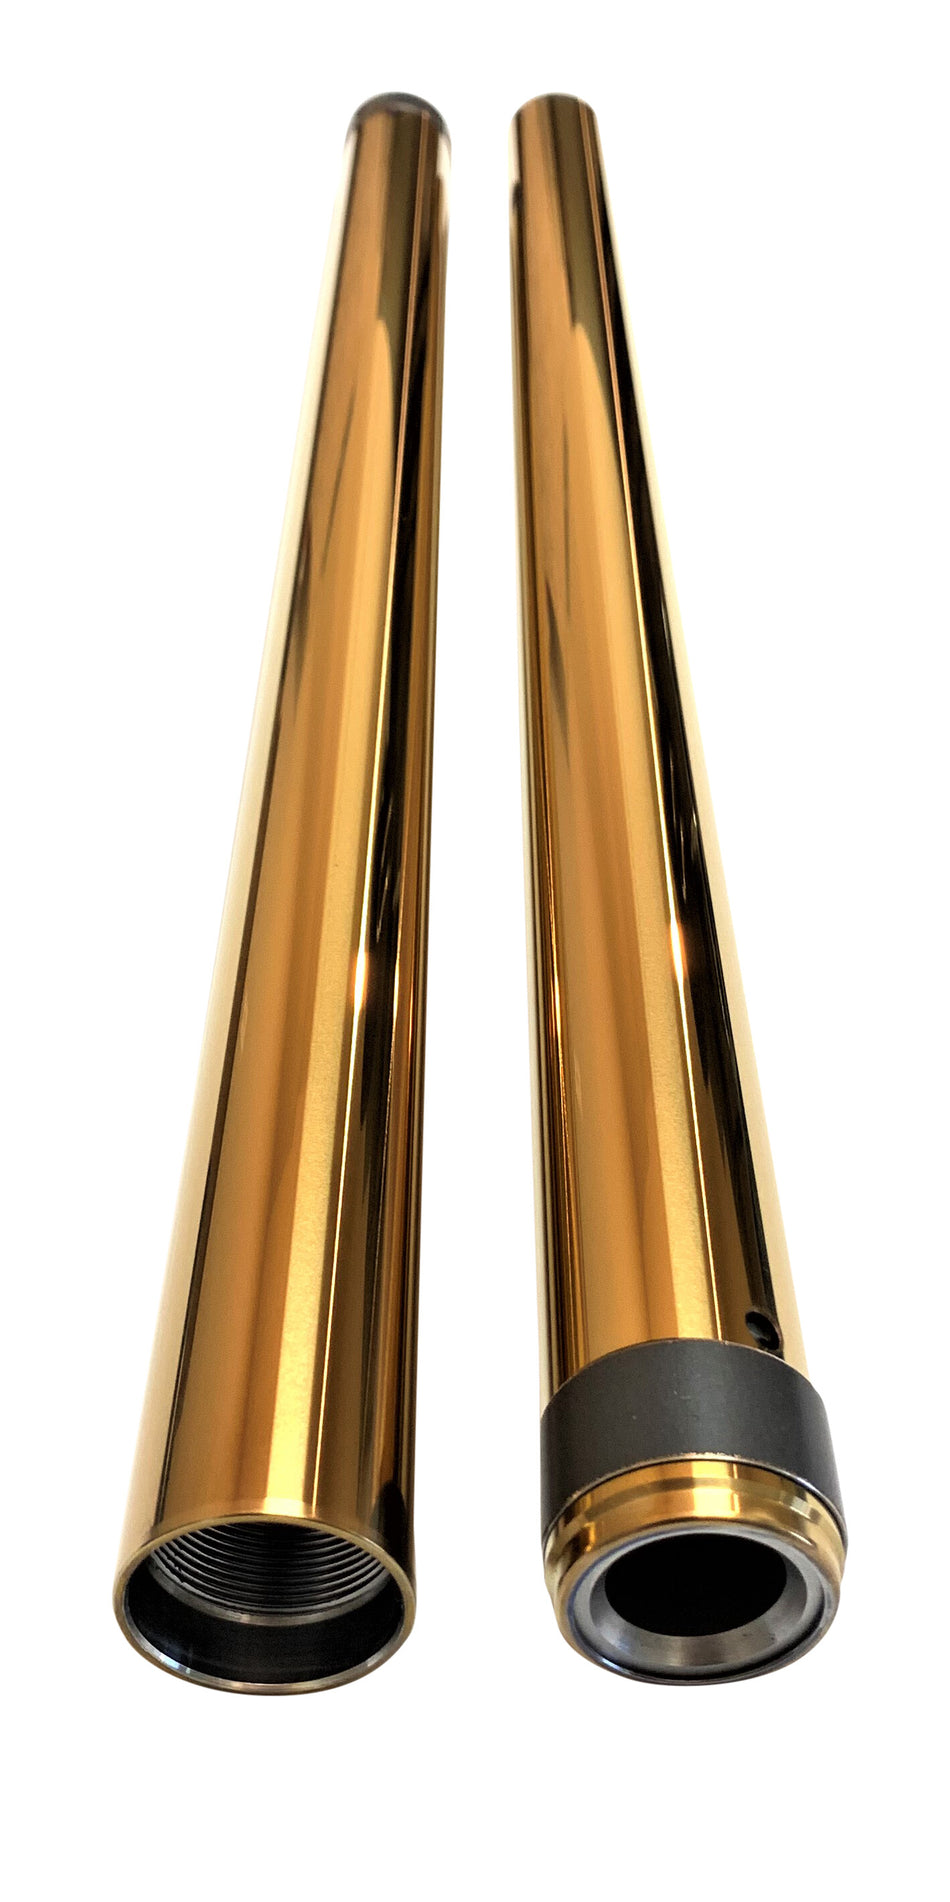 PRO ONE Pro One Gold Fork Tubes 49mm 27 1/2" 105130G